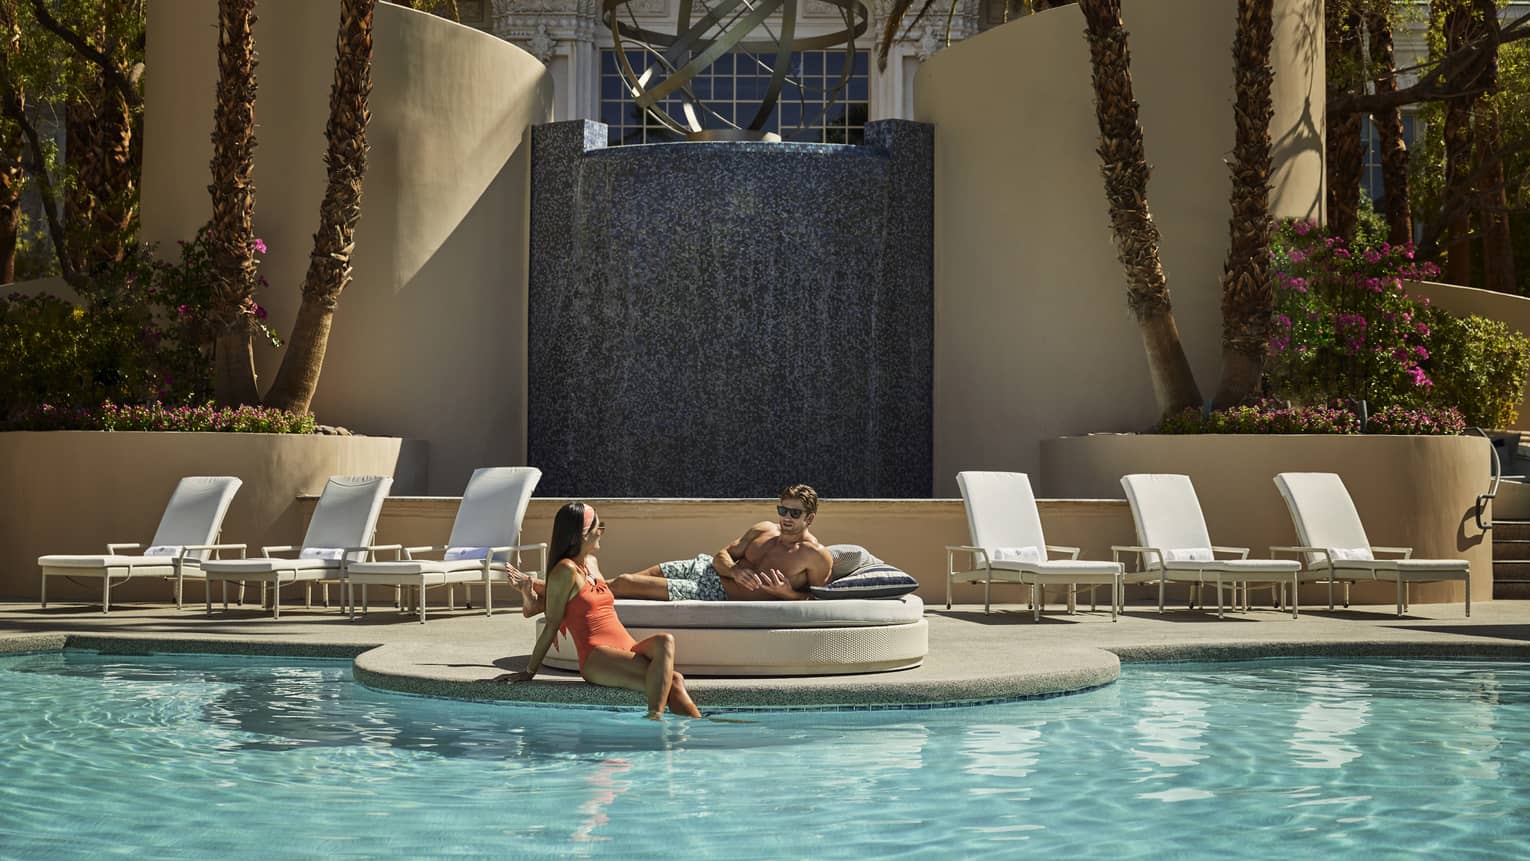 A man and woman relaxing near an outdoor pool.